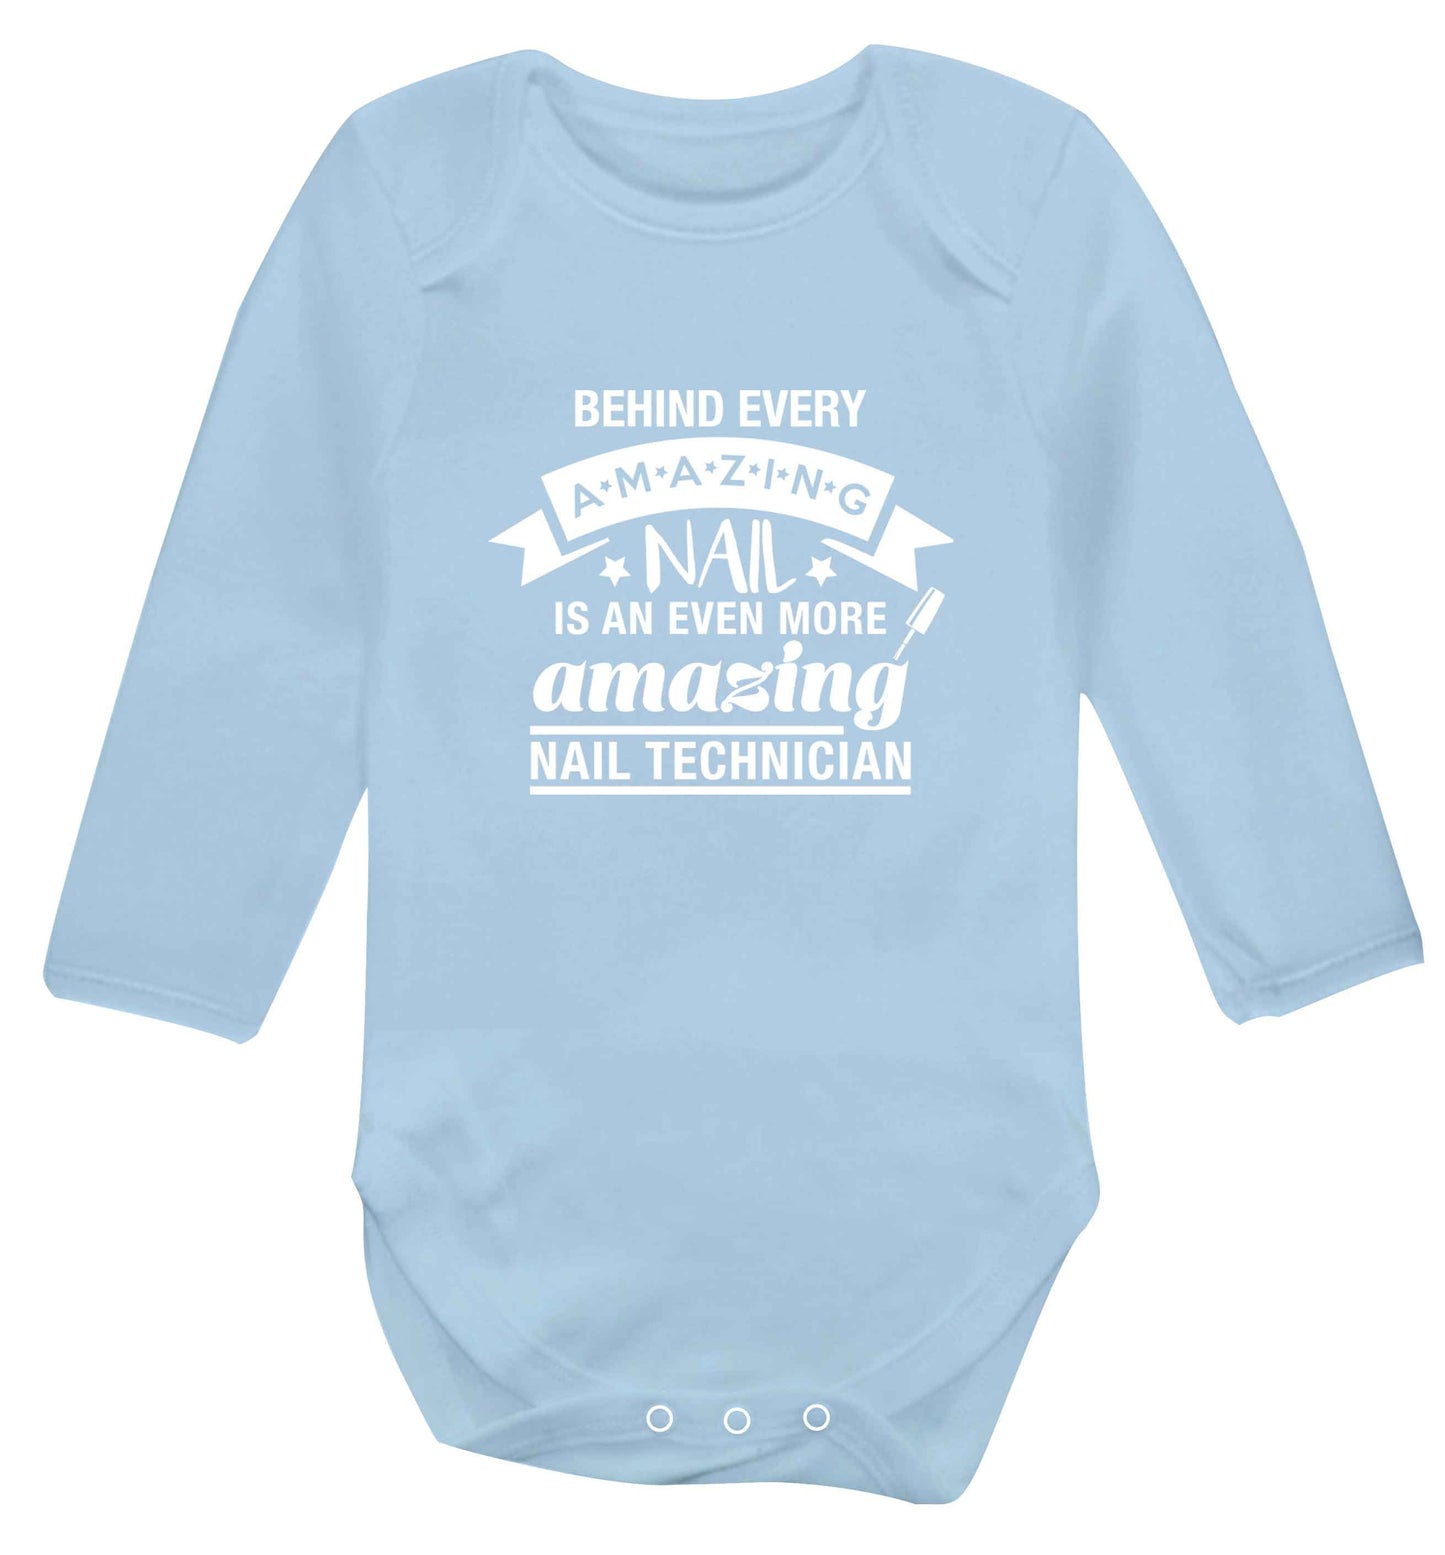 Behind every amazing nail is an even more amazing nail technician baby vest long sleeved pale blue 6-12 months